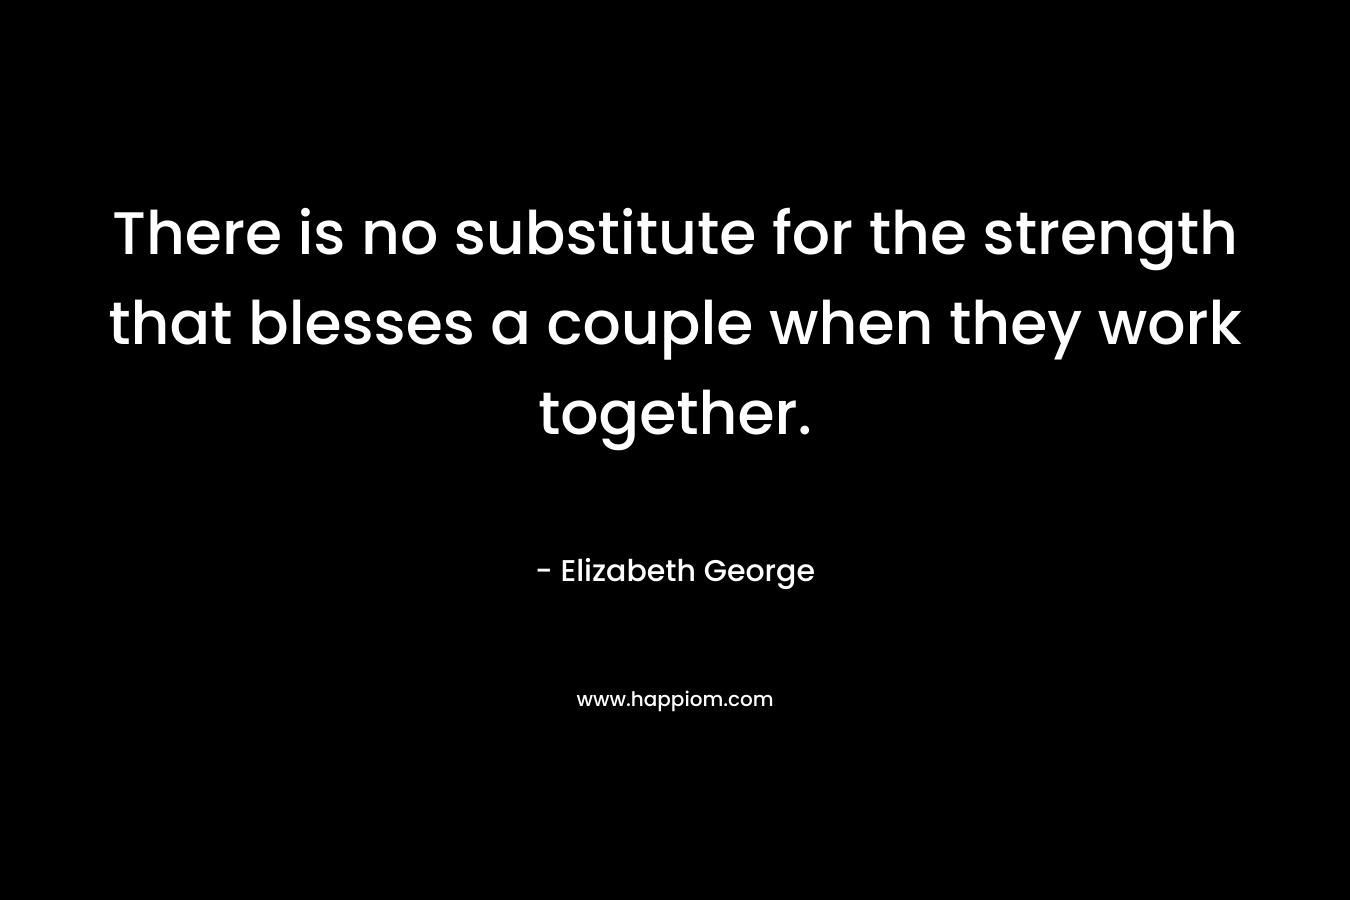 There is no substitute for the strength that blesses a couple when they work together.